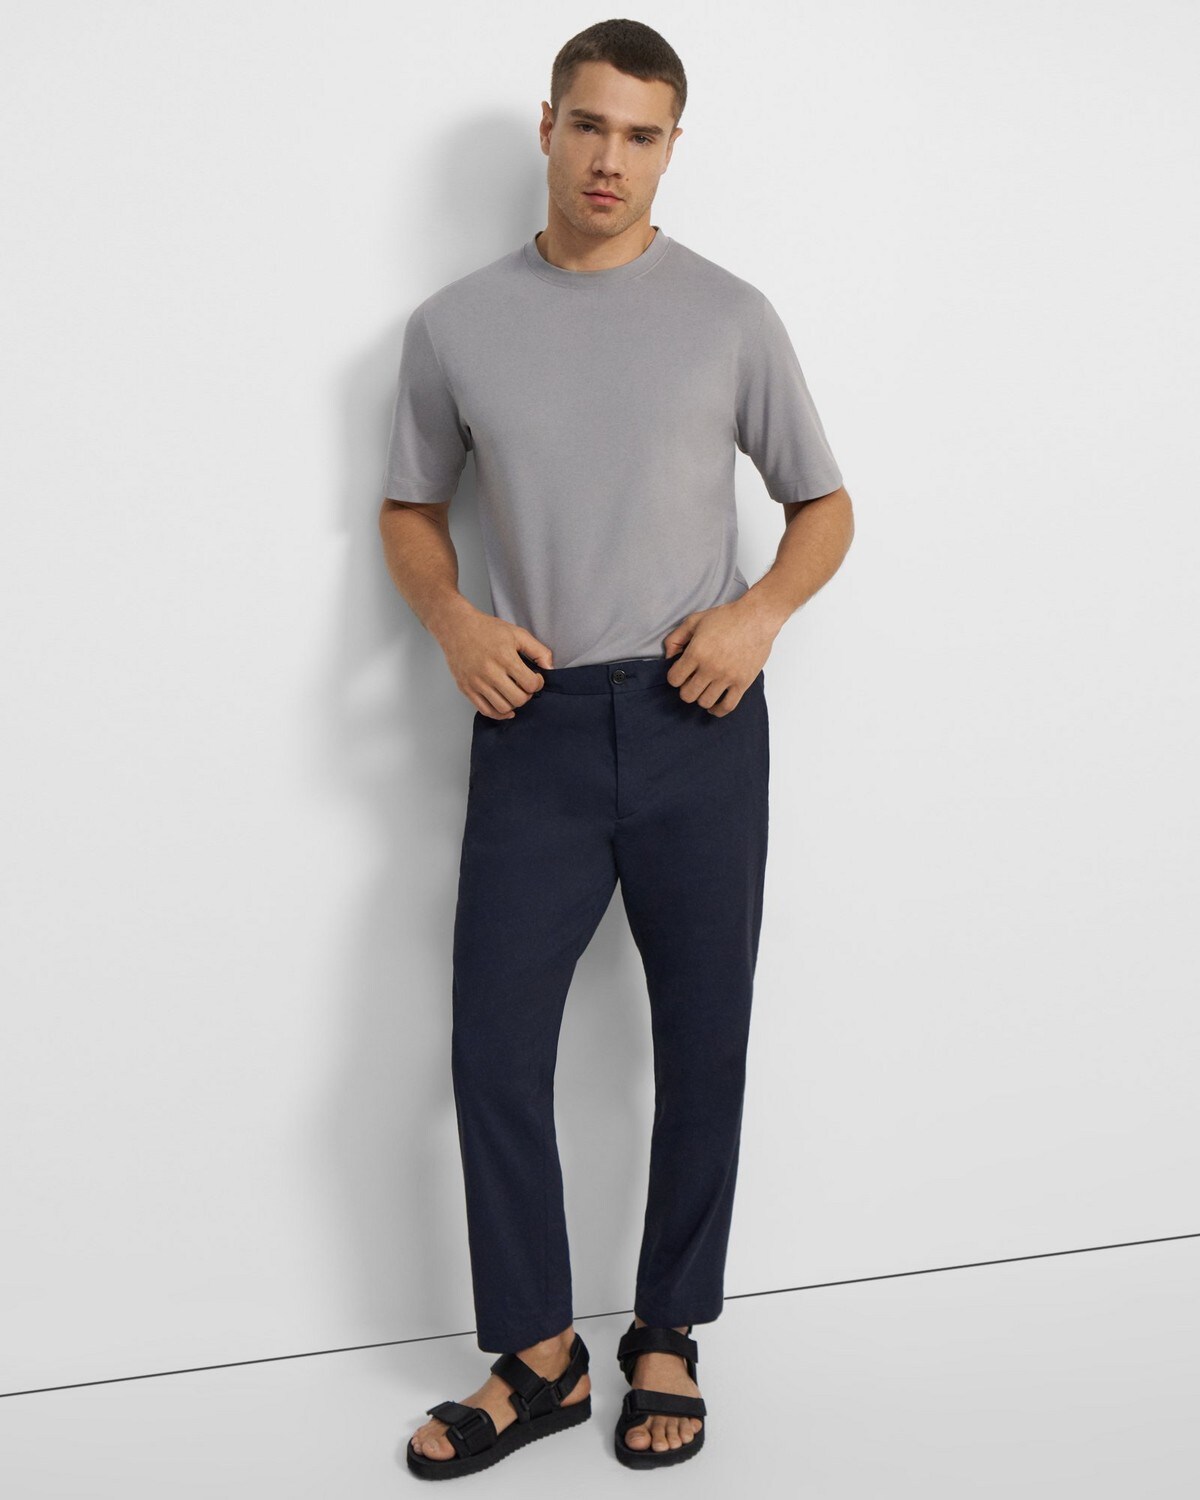 Curtis Pant in Good Linen